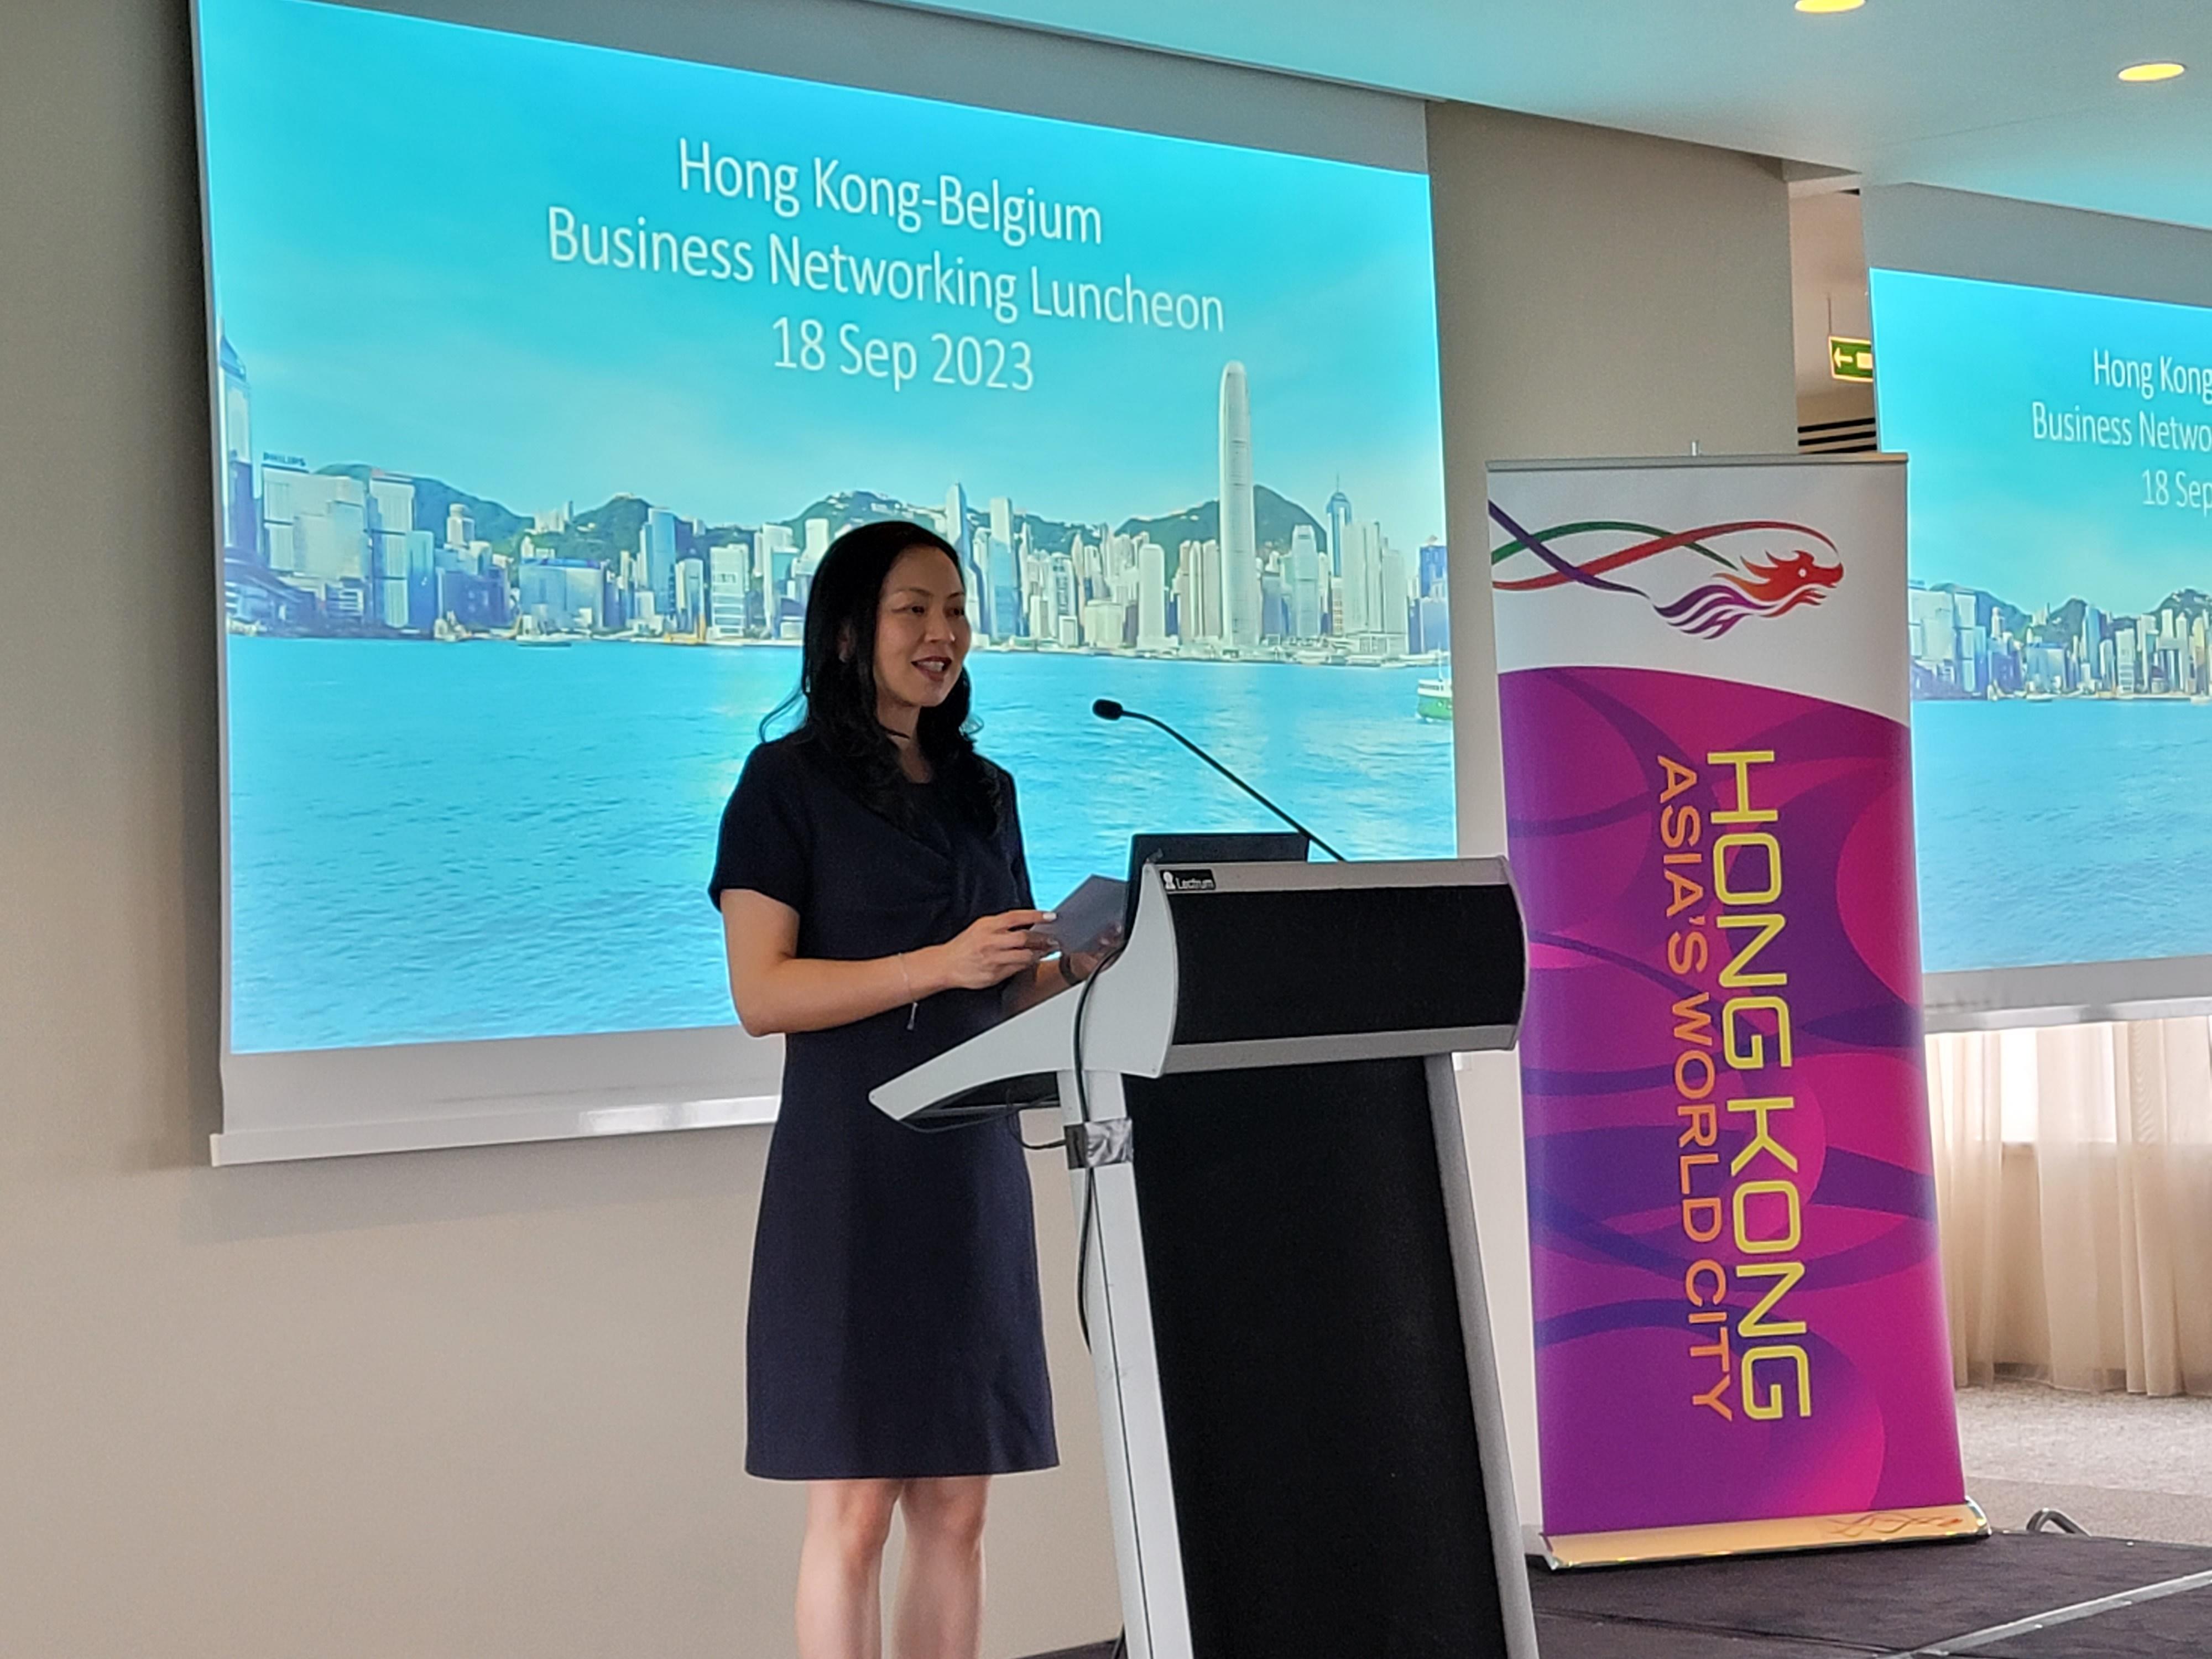 Deputy Representative of the Hong Kong Economic and Trade Office in Brussels, Miss Fiona Li, delivered welcoming remarks at the Hong Kong-Belgium business networking luncheon held in Brussels, Belgium on September 18 (Brussels time).